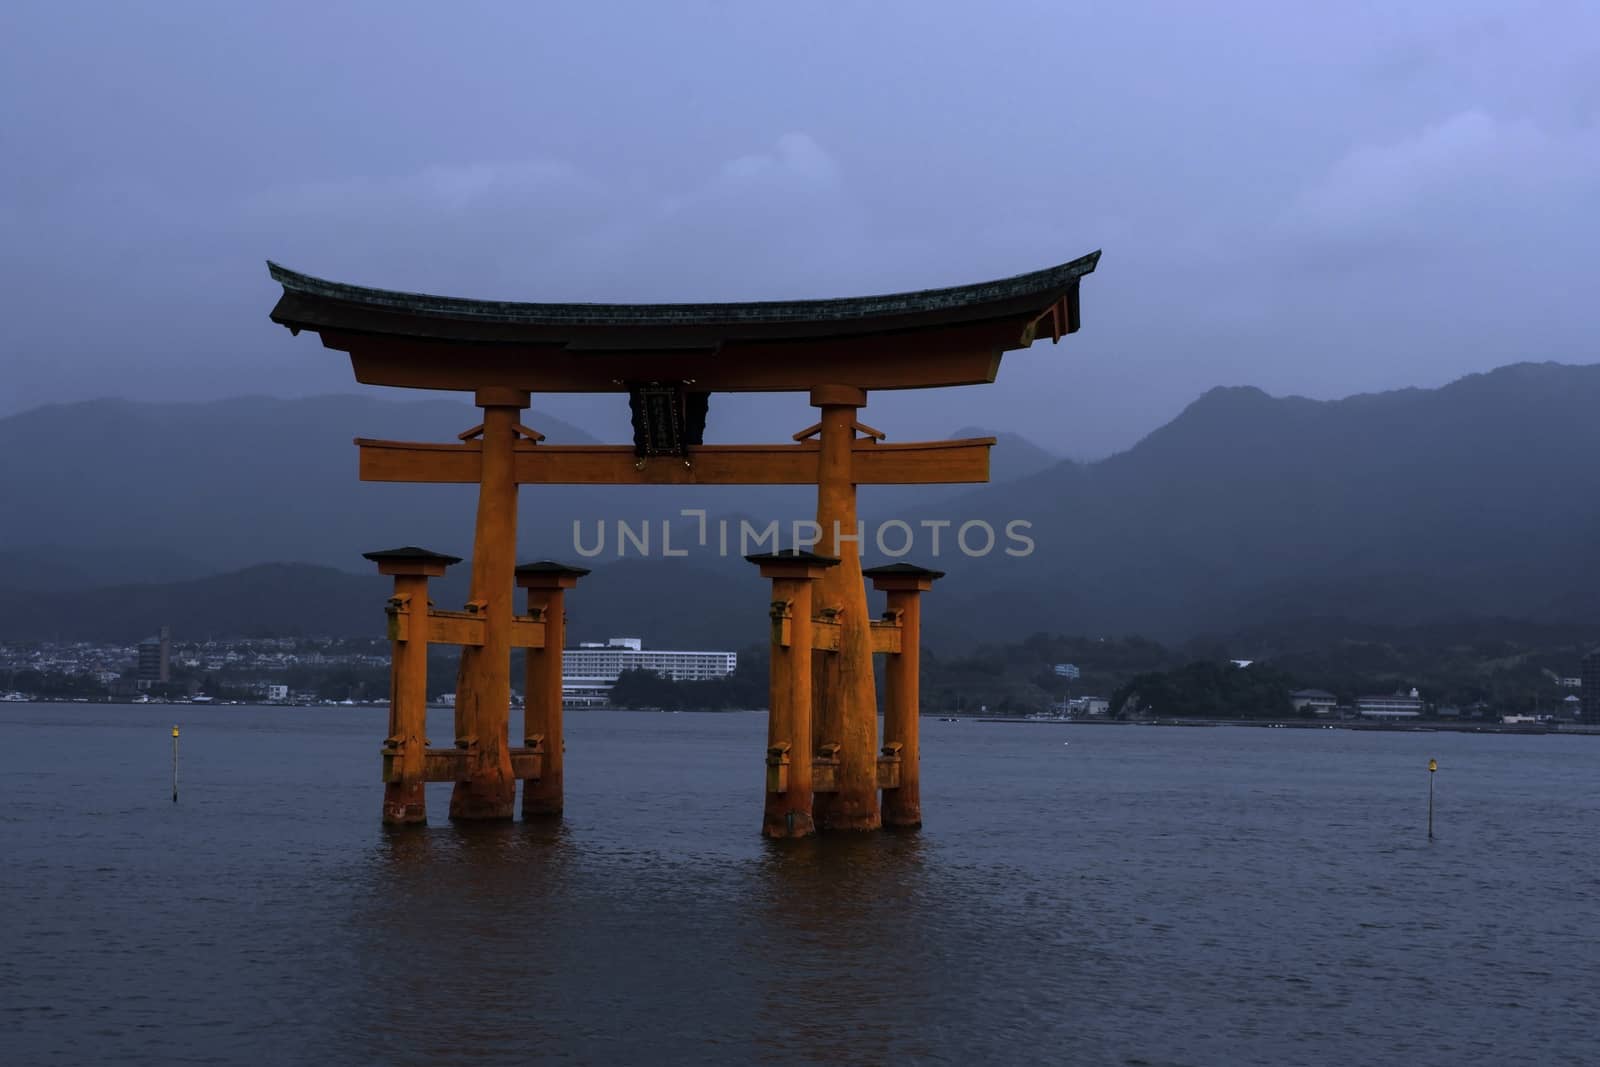 Floating torii gate in Miyajima (shrine island, in Japanese), in front of Hiroshima, Japan. Torii gates mark the approach and entrance to a Shinto shrine.